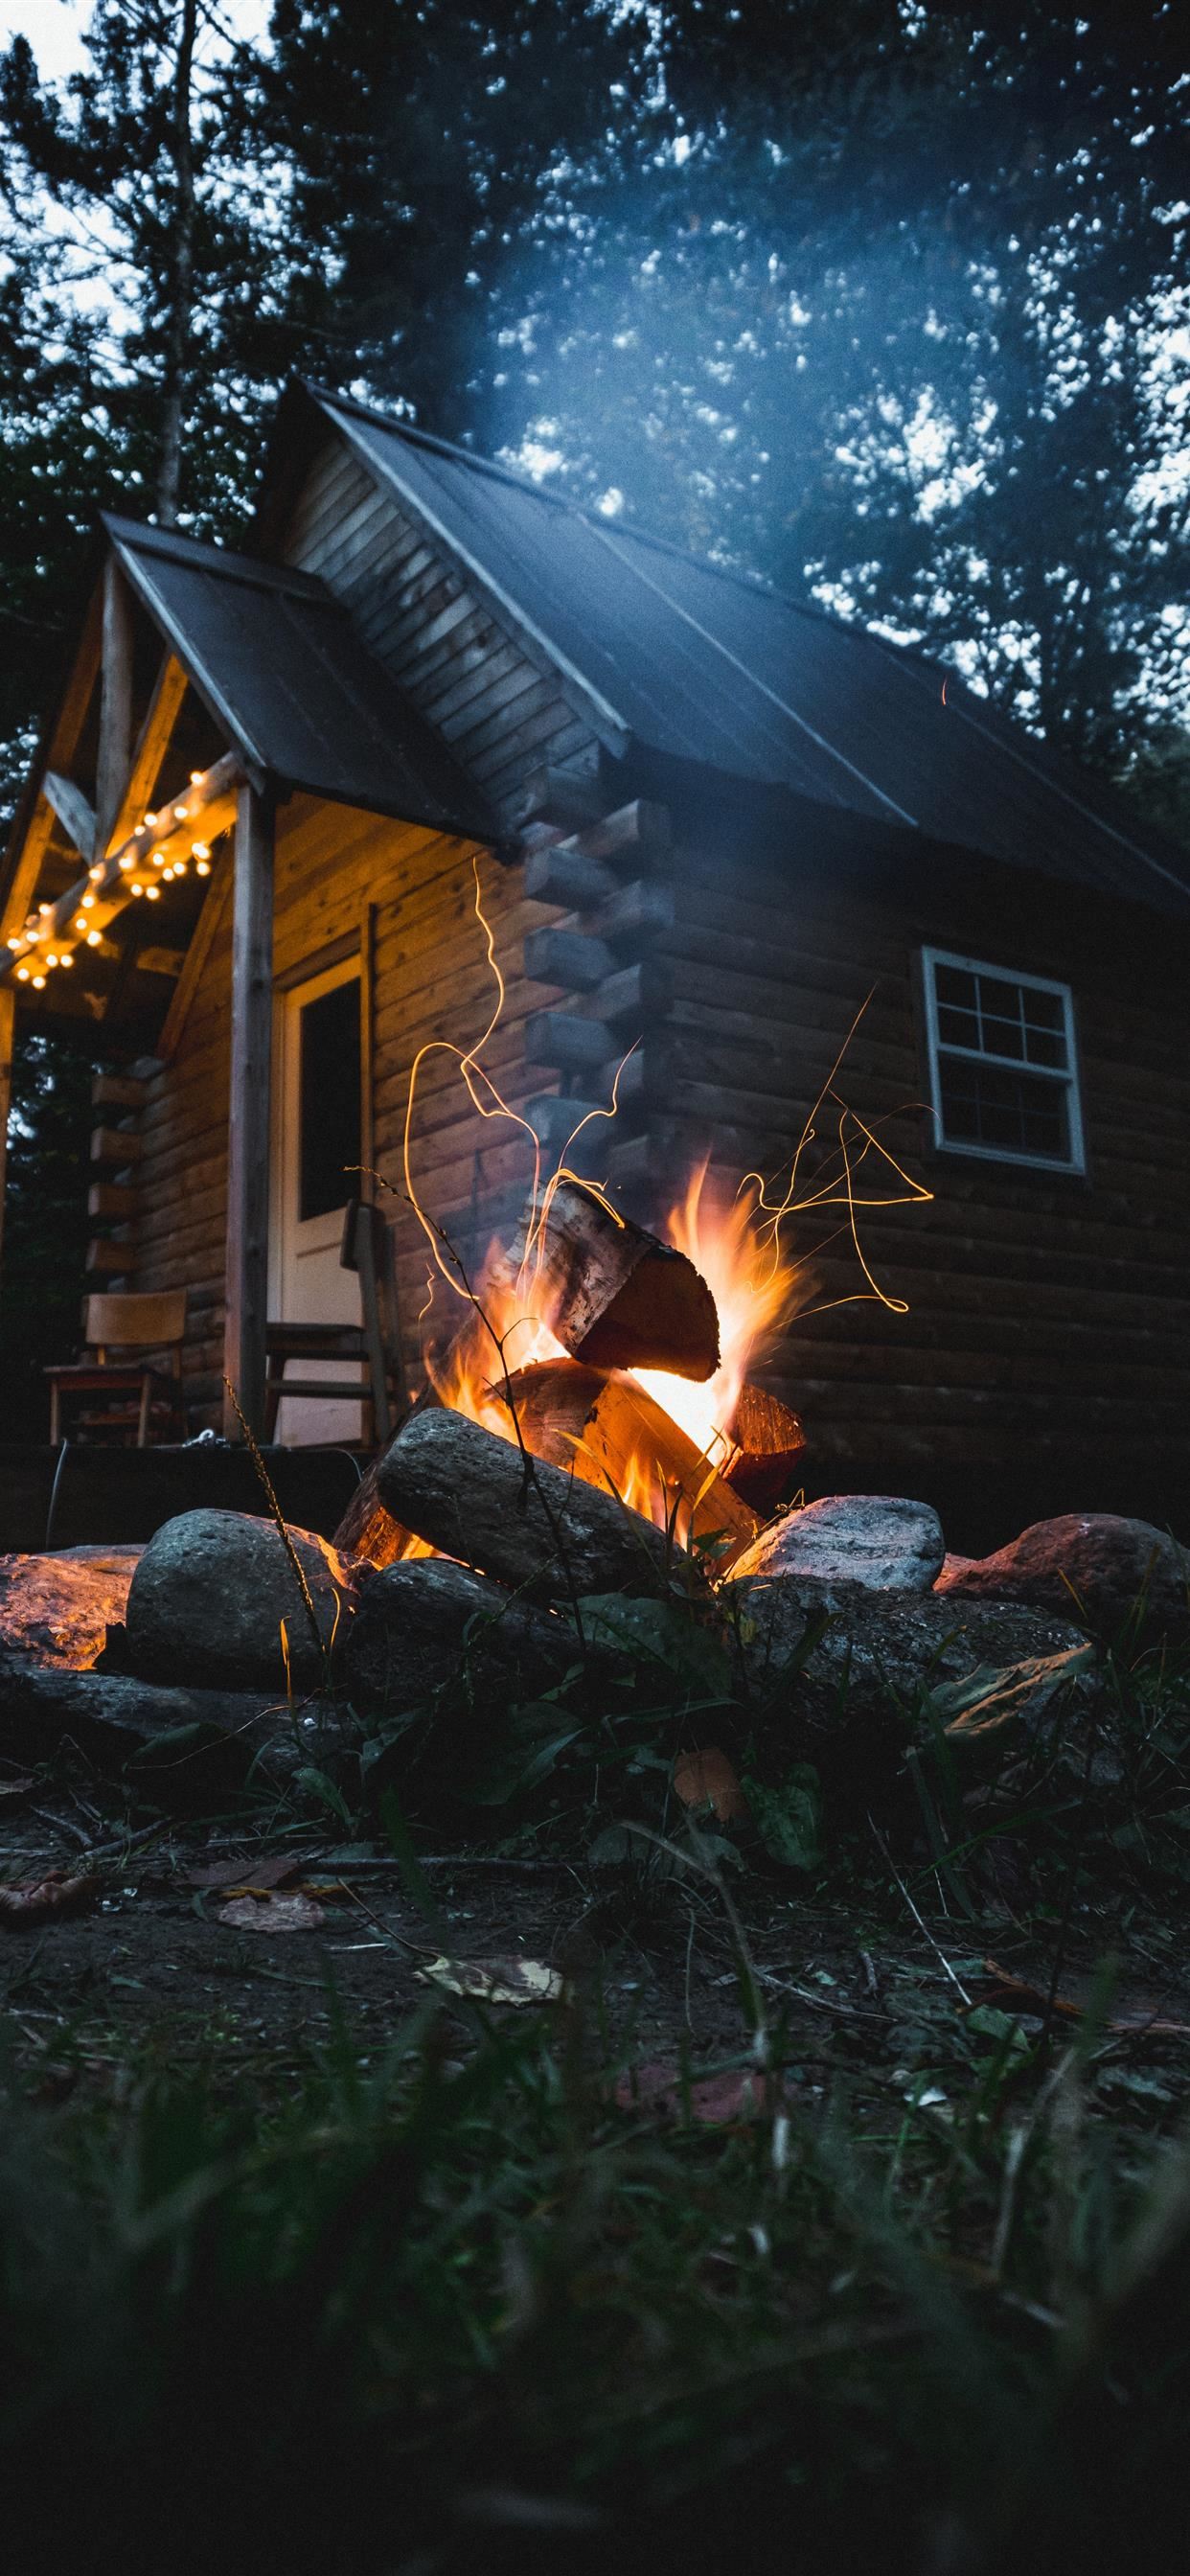 Cabin in the Woods iPhone Wallpaper Free Download